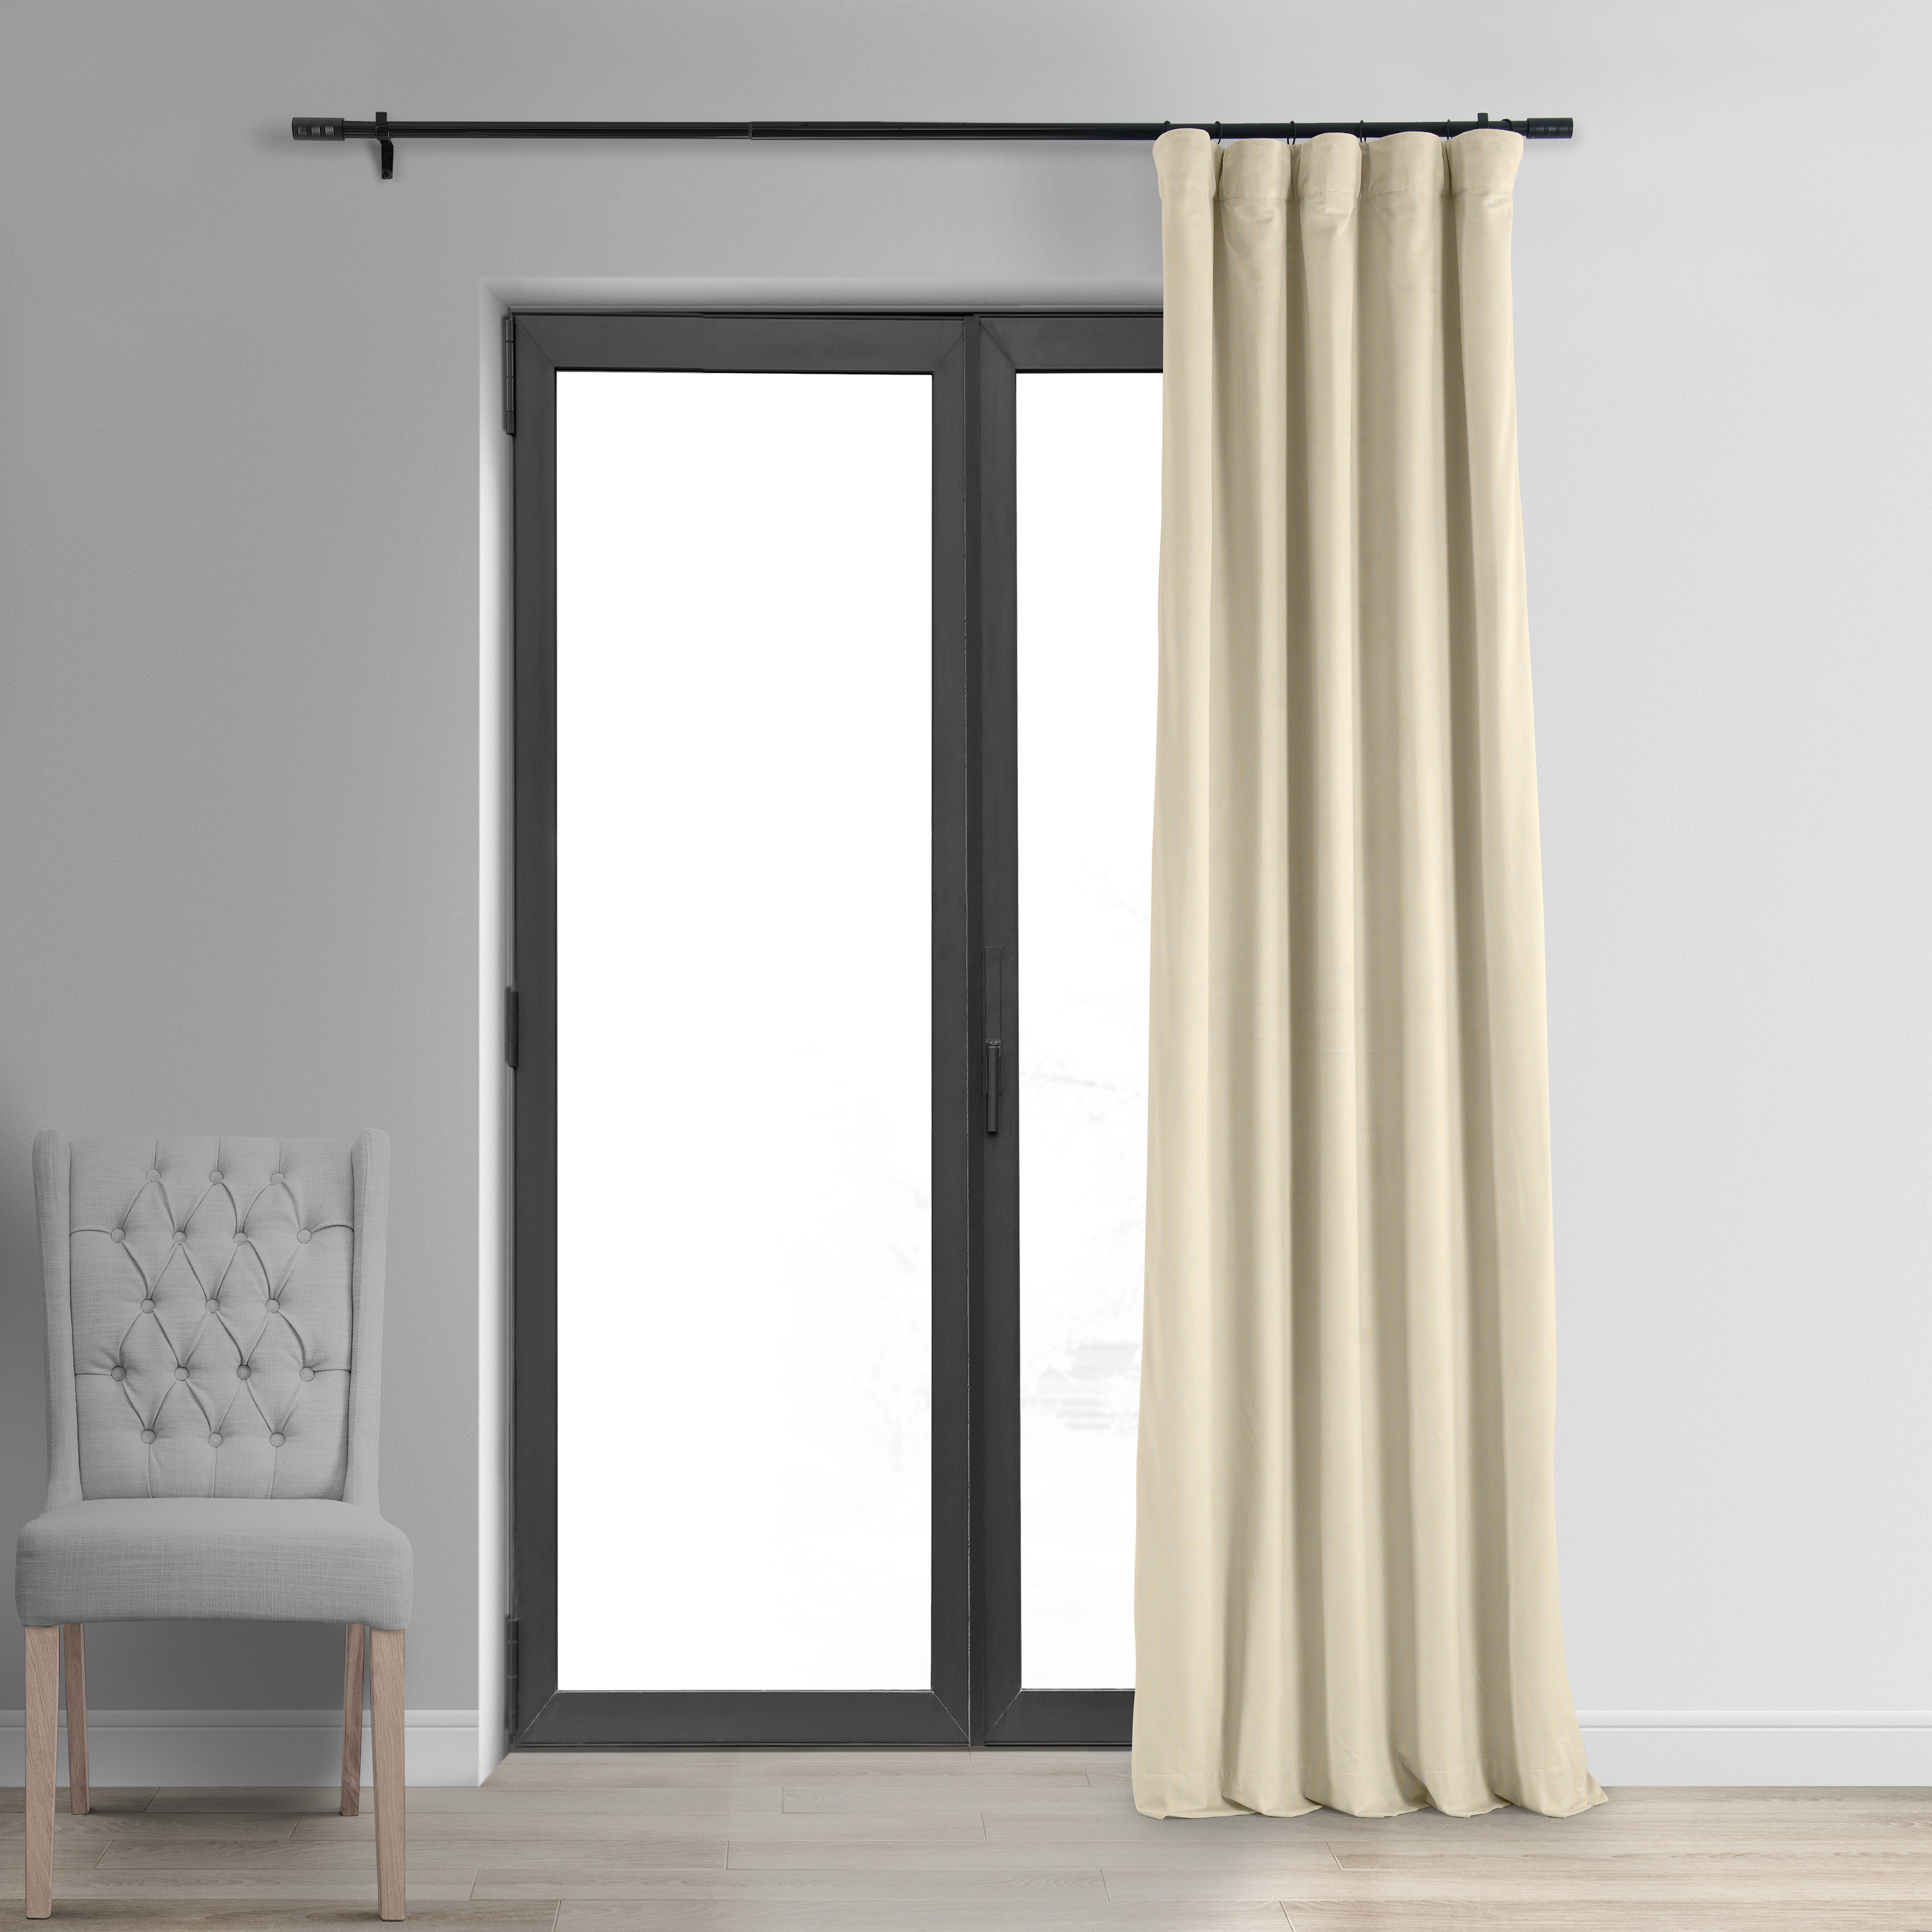 Wayfair | 63 Inch and Less Blackout Curtains & Drapes You'll Love